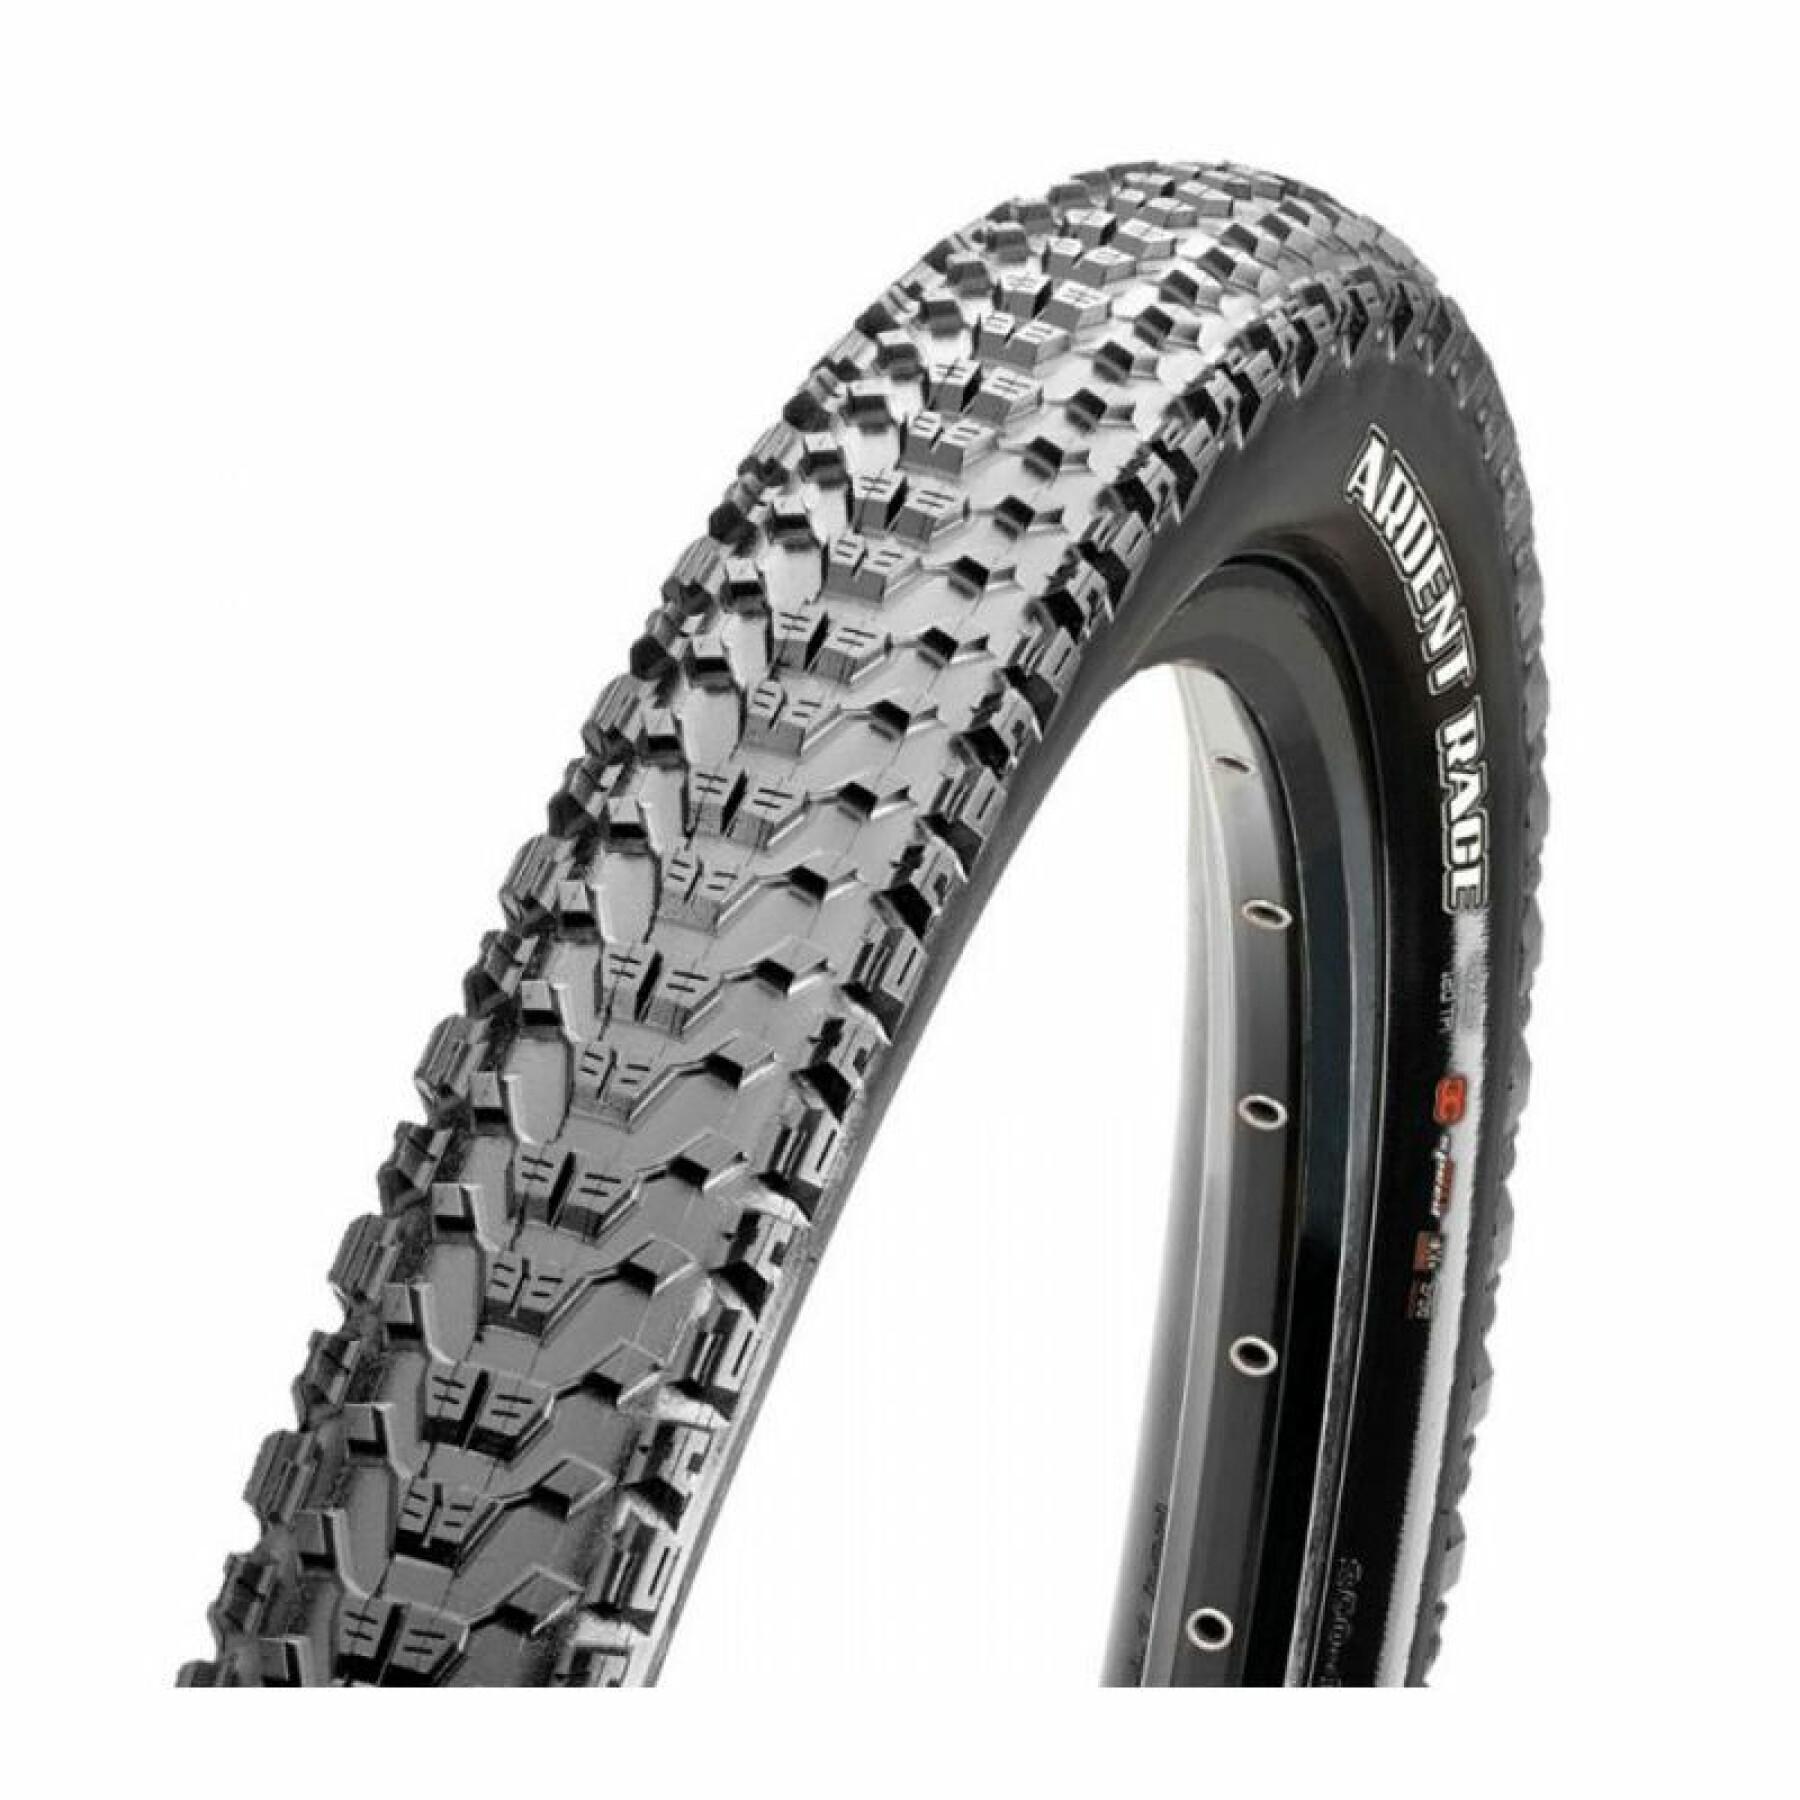 Tubeless soft tire Maxxis Ardent Race Exo